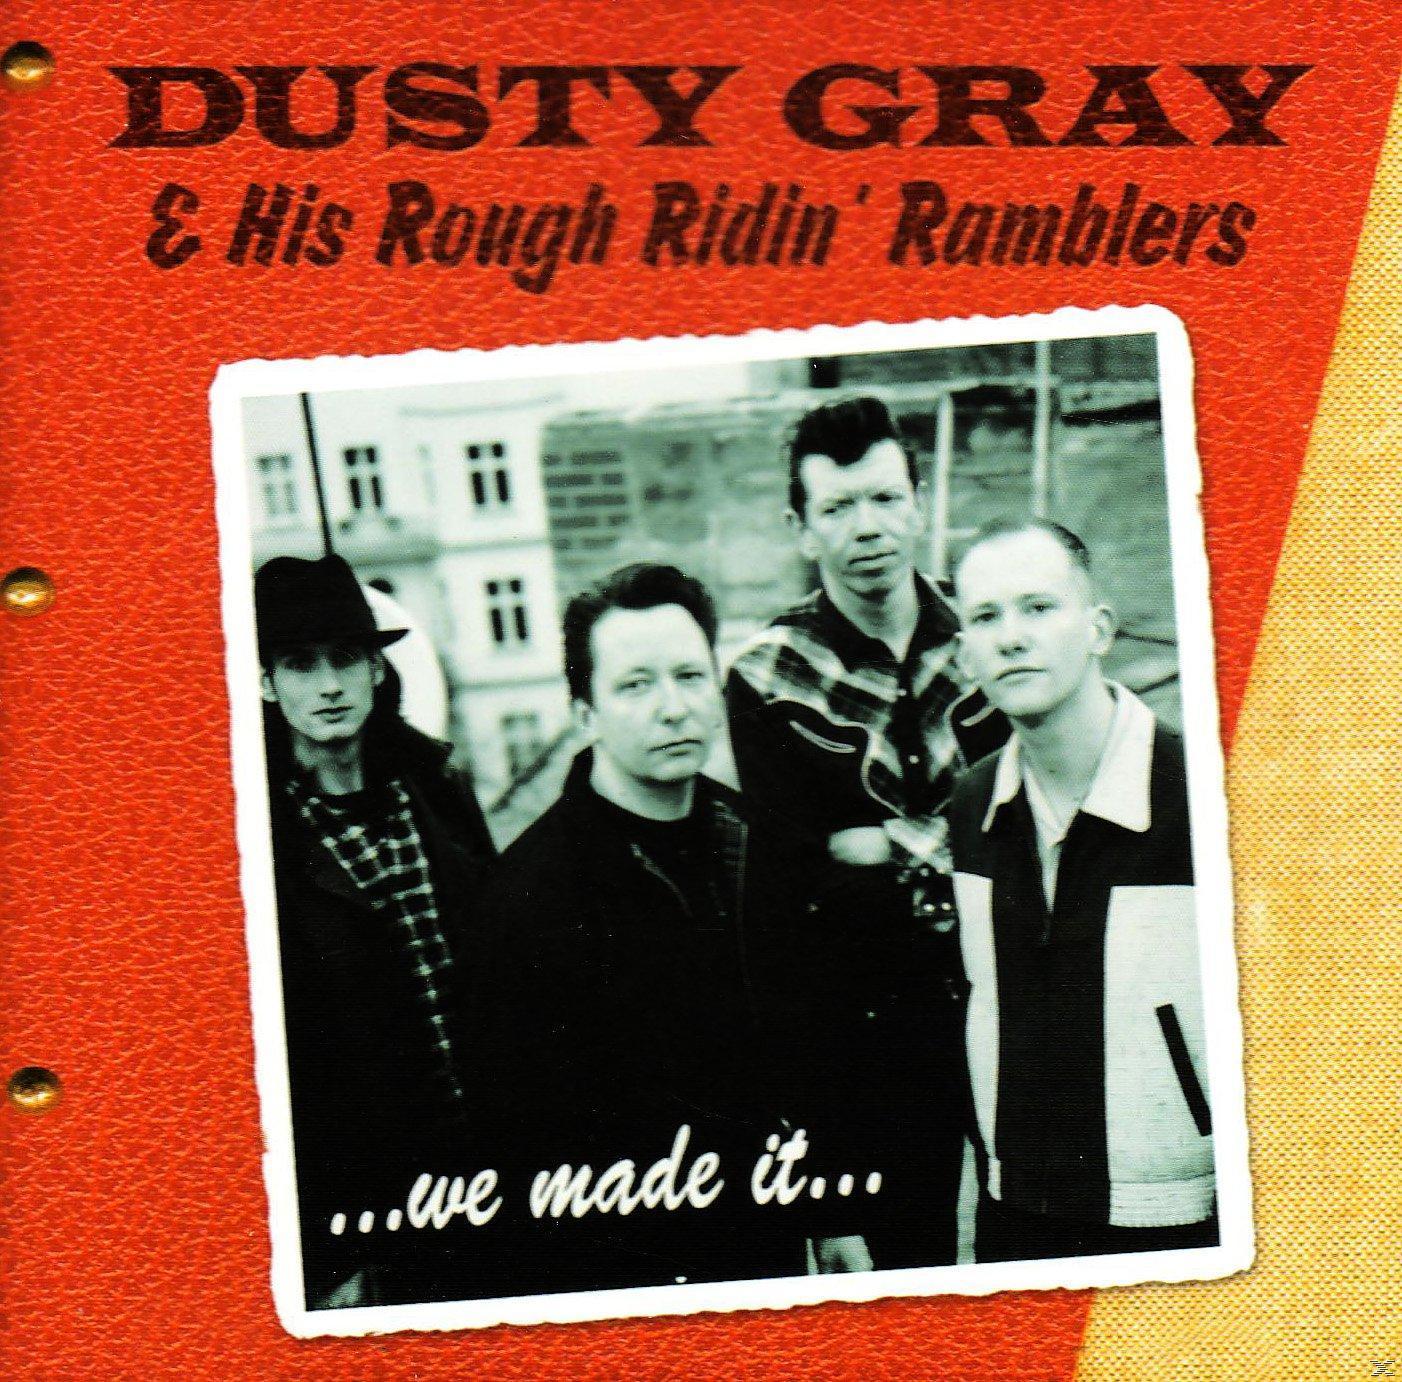 Dusty-gray & Rough Ramblers We It - (CD) - Ridin\' Made His